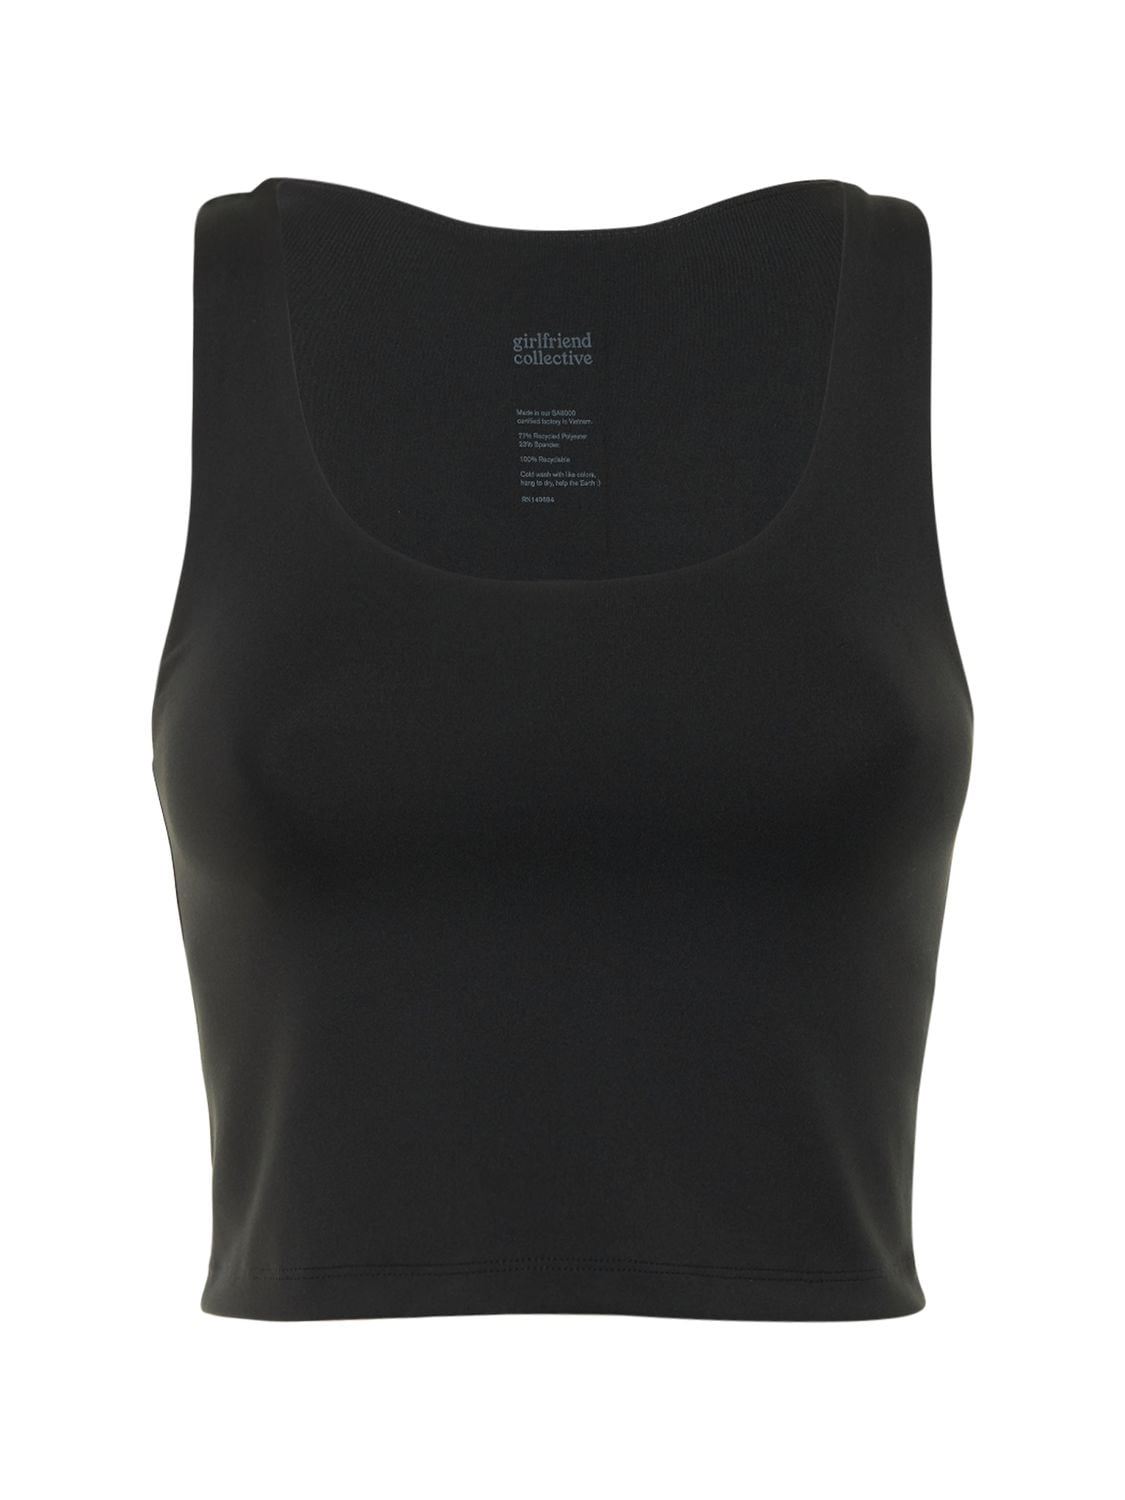 Luxe Scoop Stretch Tech Tank Top